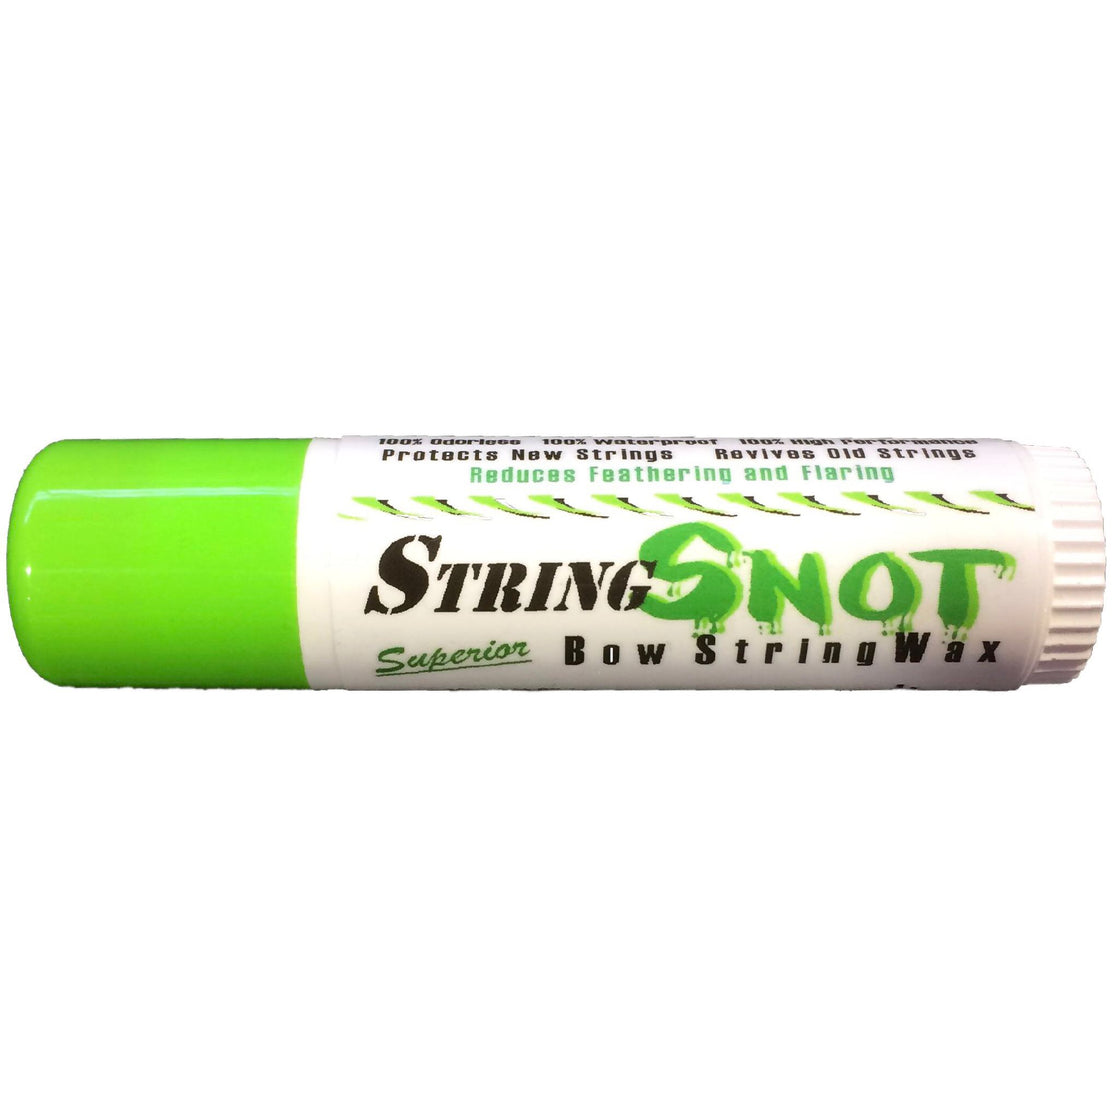 30-06 String Snot Wax